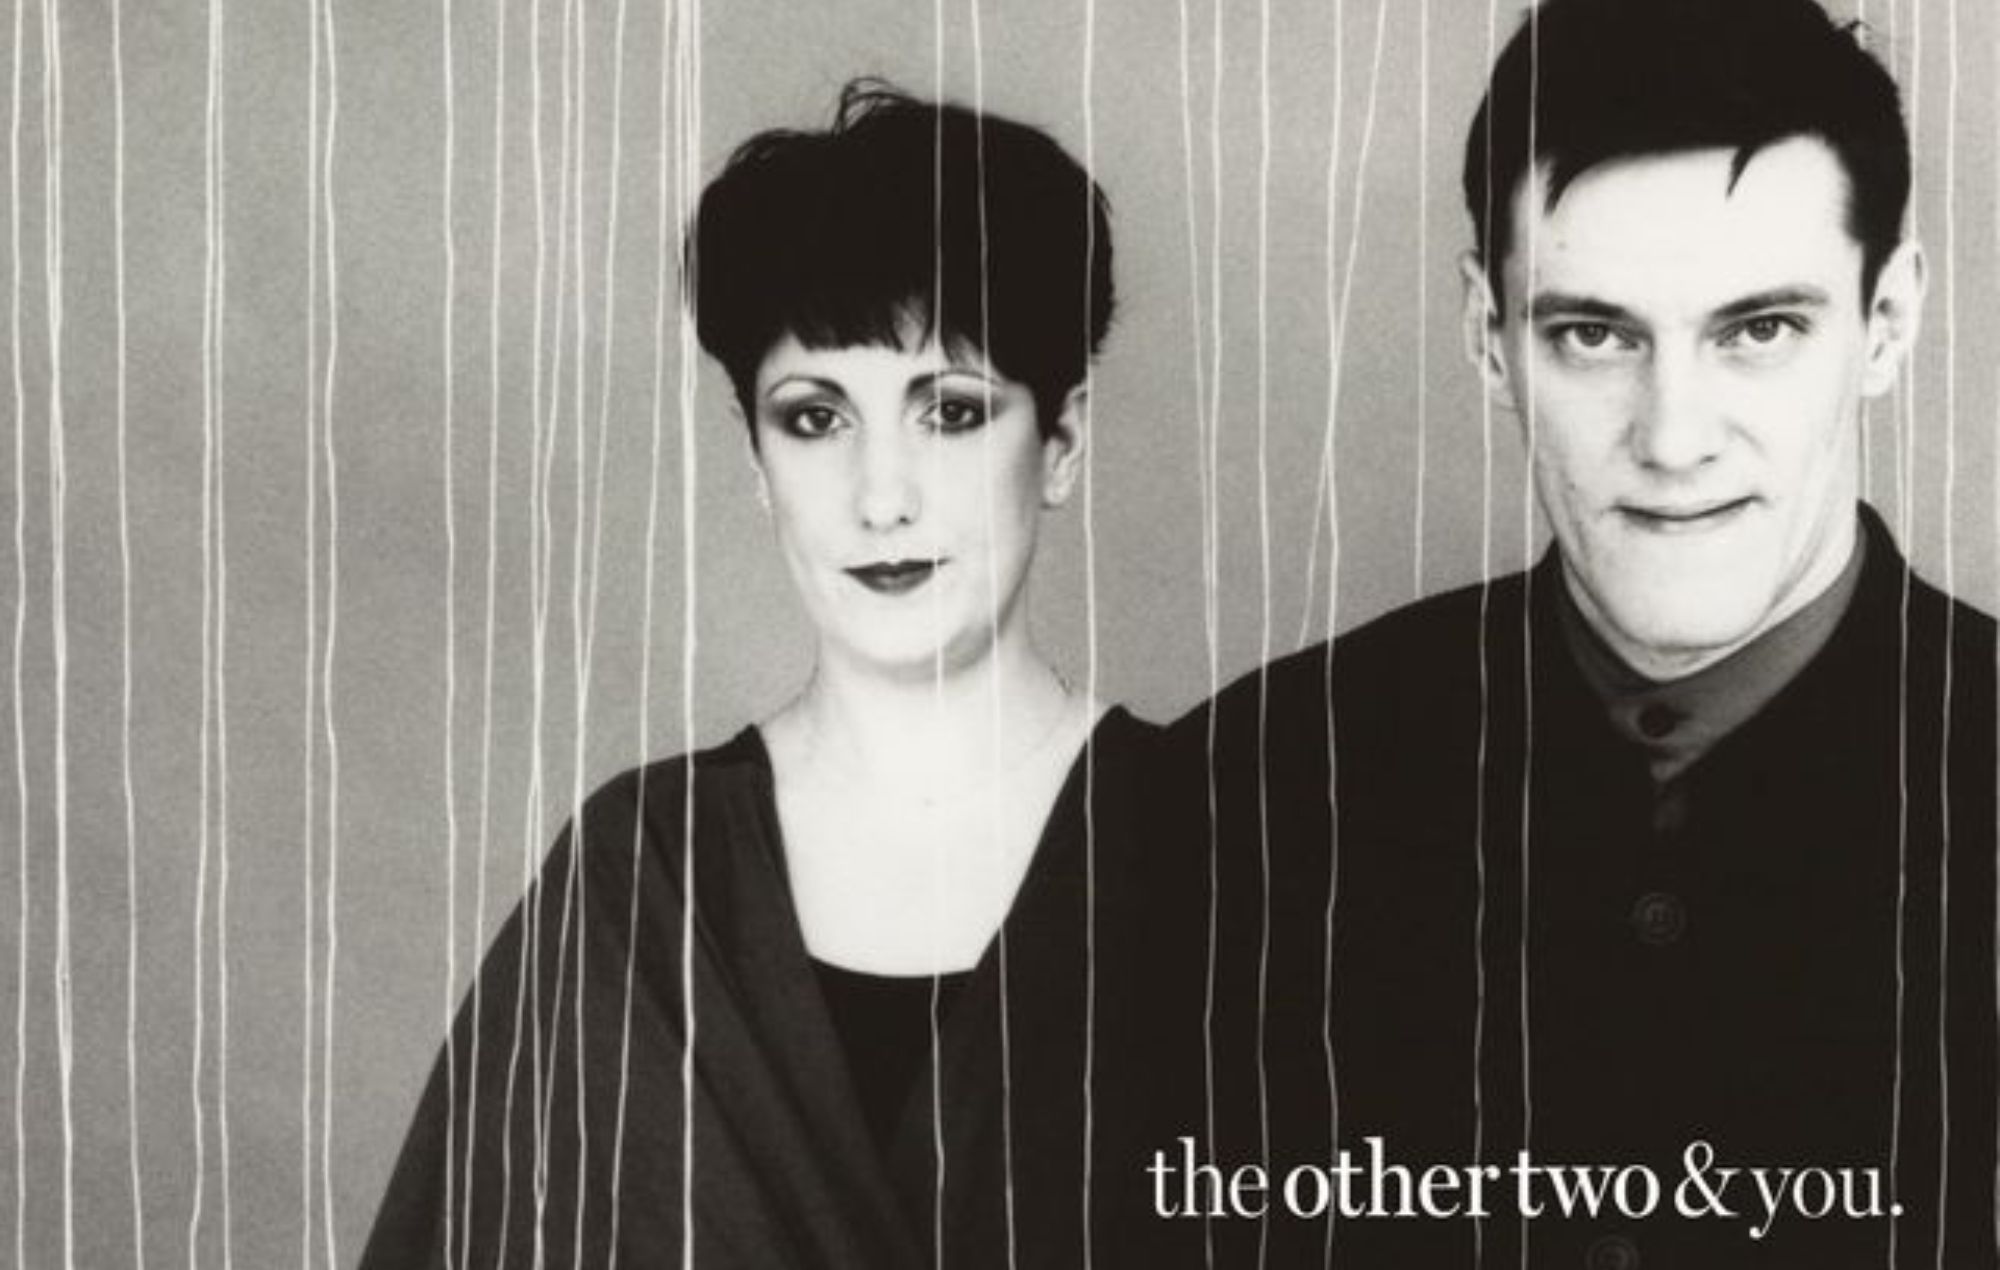 New Order’s Stephen Morris and Gillian Gilbert announce reissue of debut album from The Other Two